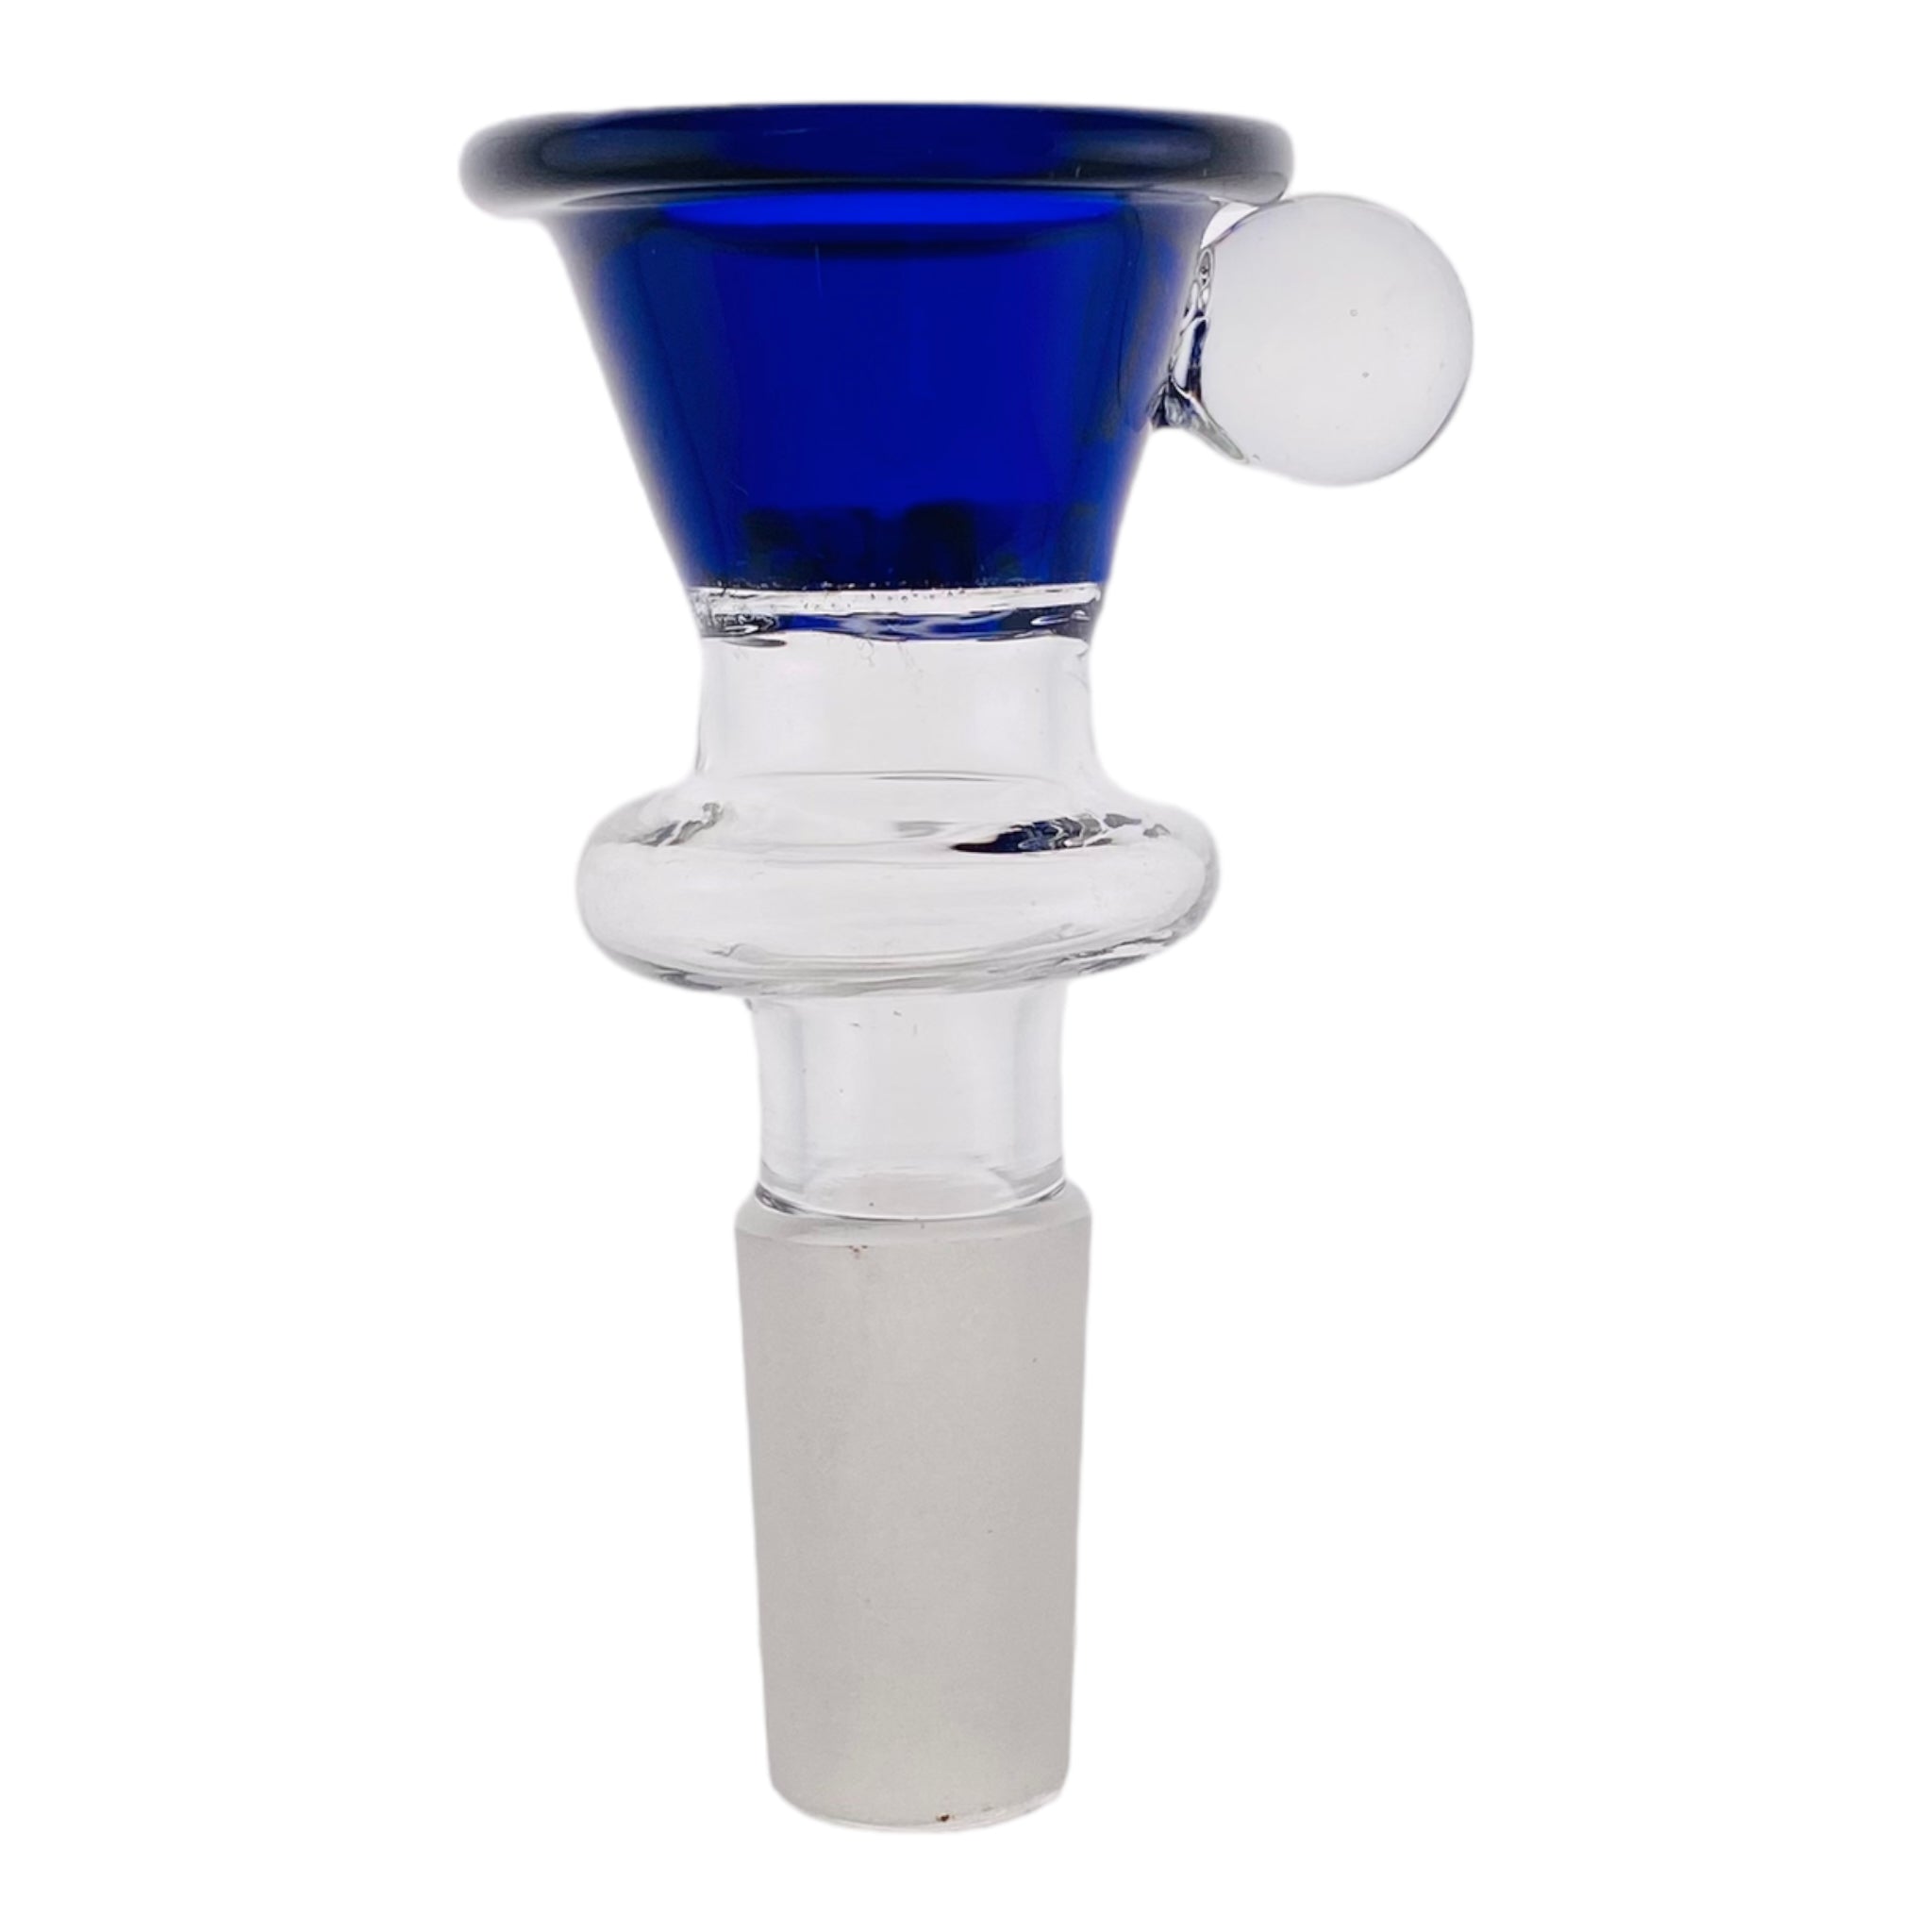 14mm Flower Bowl - Large Martini Funnel Bong Bowl Piece With Built In Screen - Blue